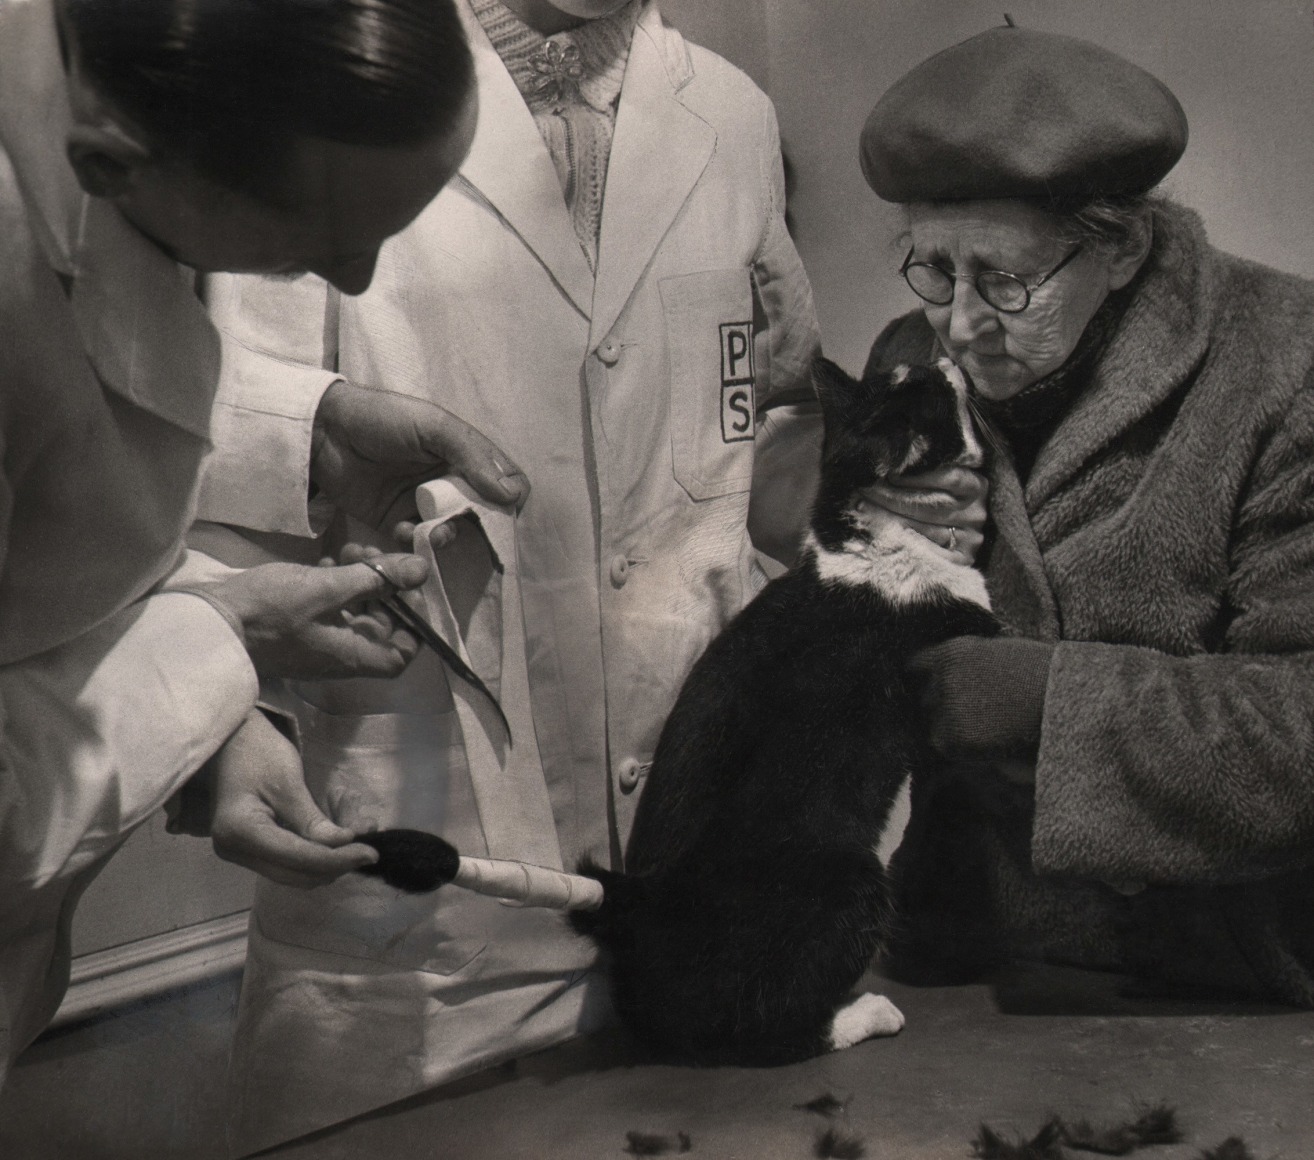 19. Godfrey Macdomnic, One of a series of pictures made by GODFREY MACDOMNIC for the People's Dispensary for Sick Animals movement, c. 1958. An old woman holds a cat on the table in front of her while two veterinarians in white coats wrap its tail in gauze.